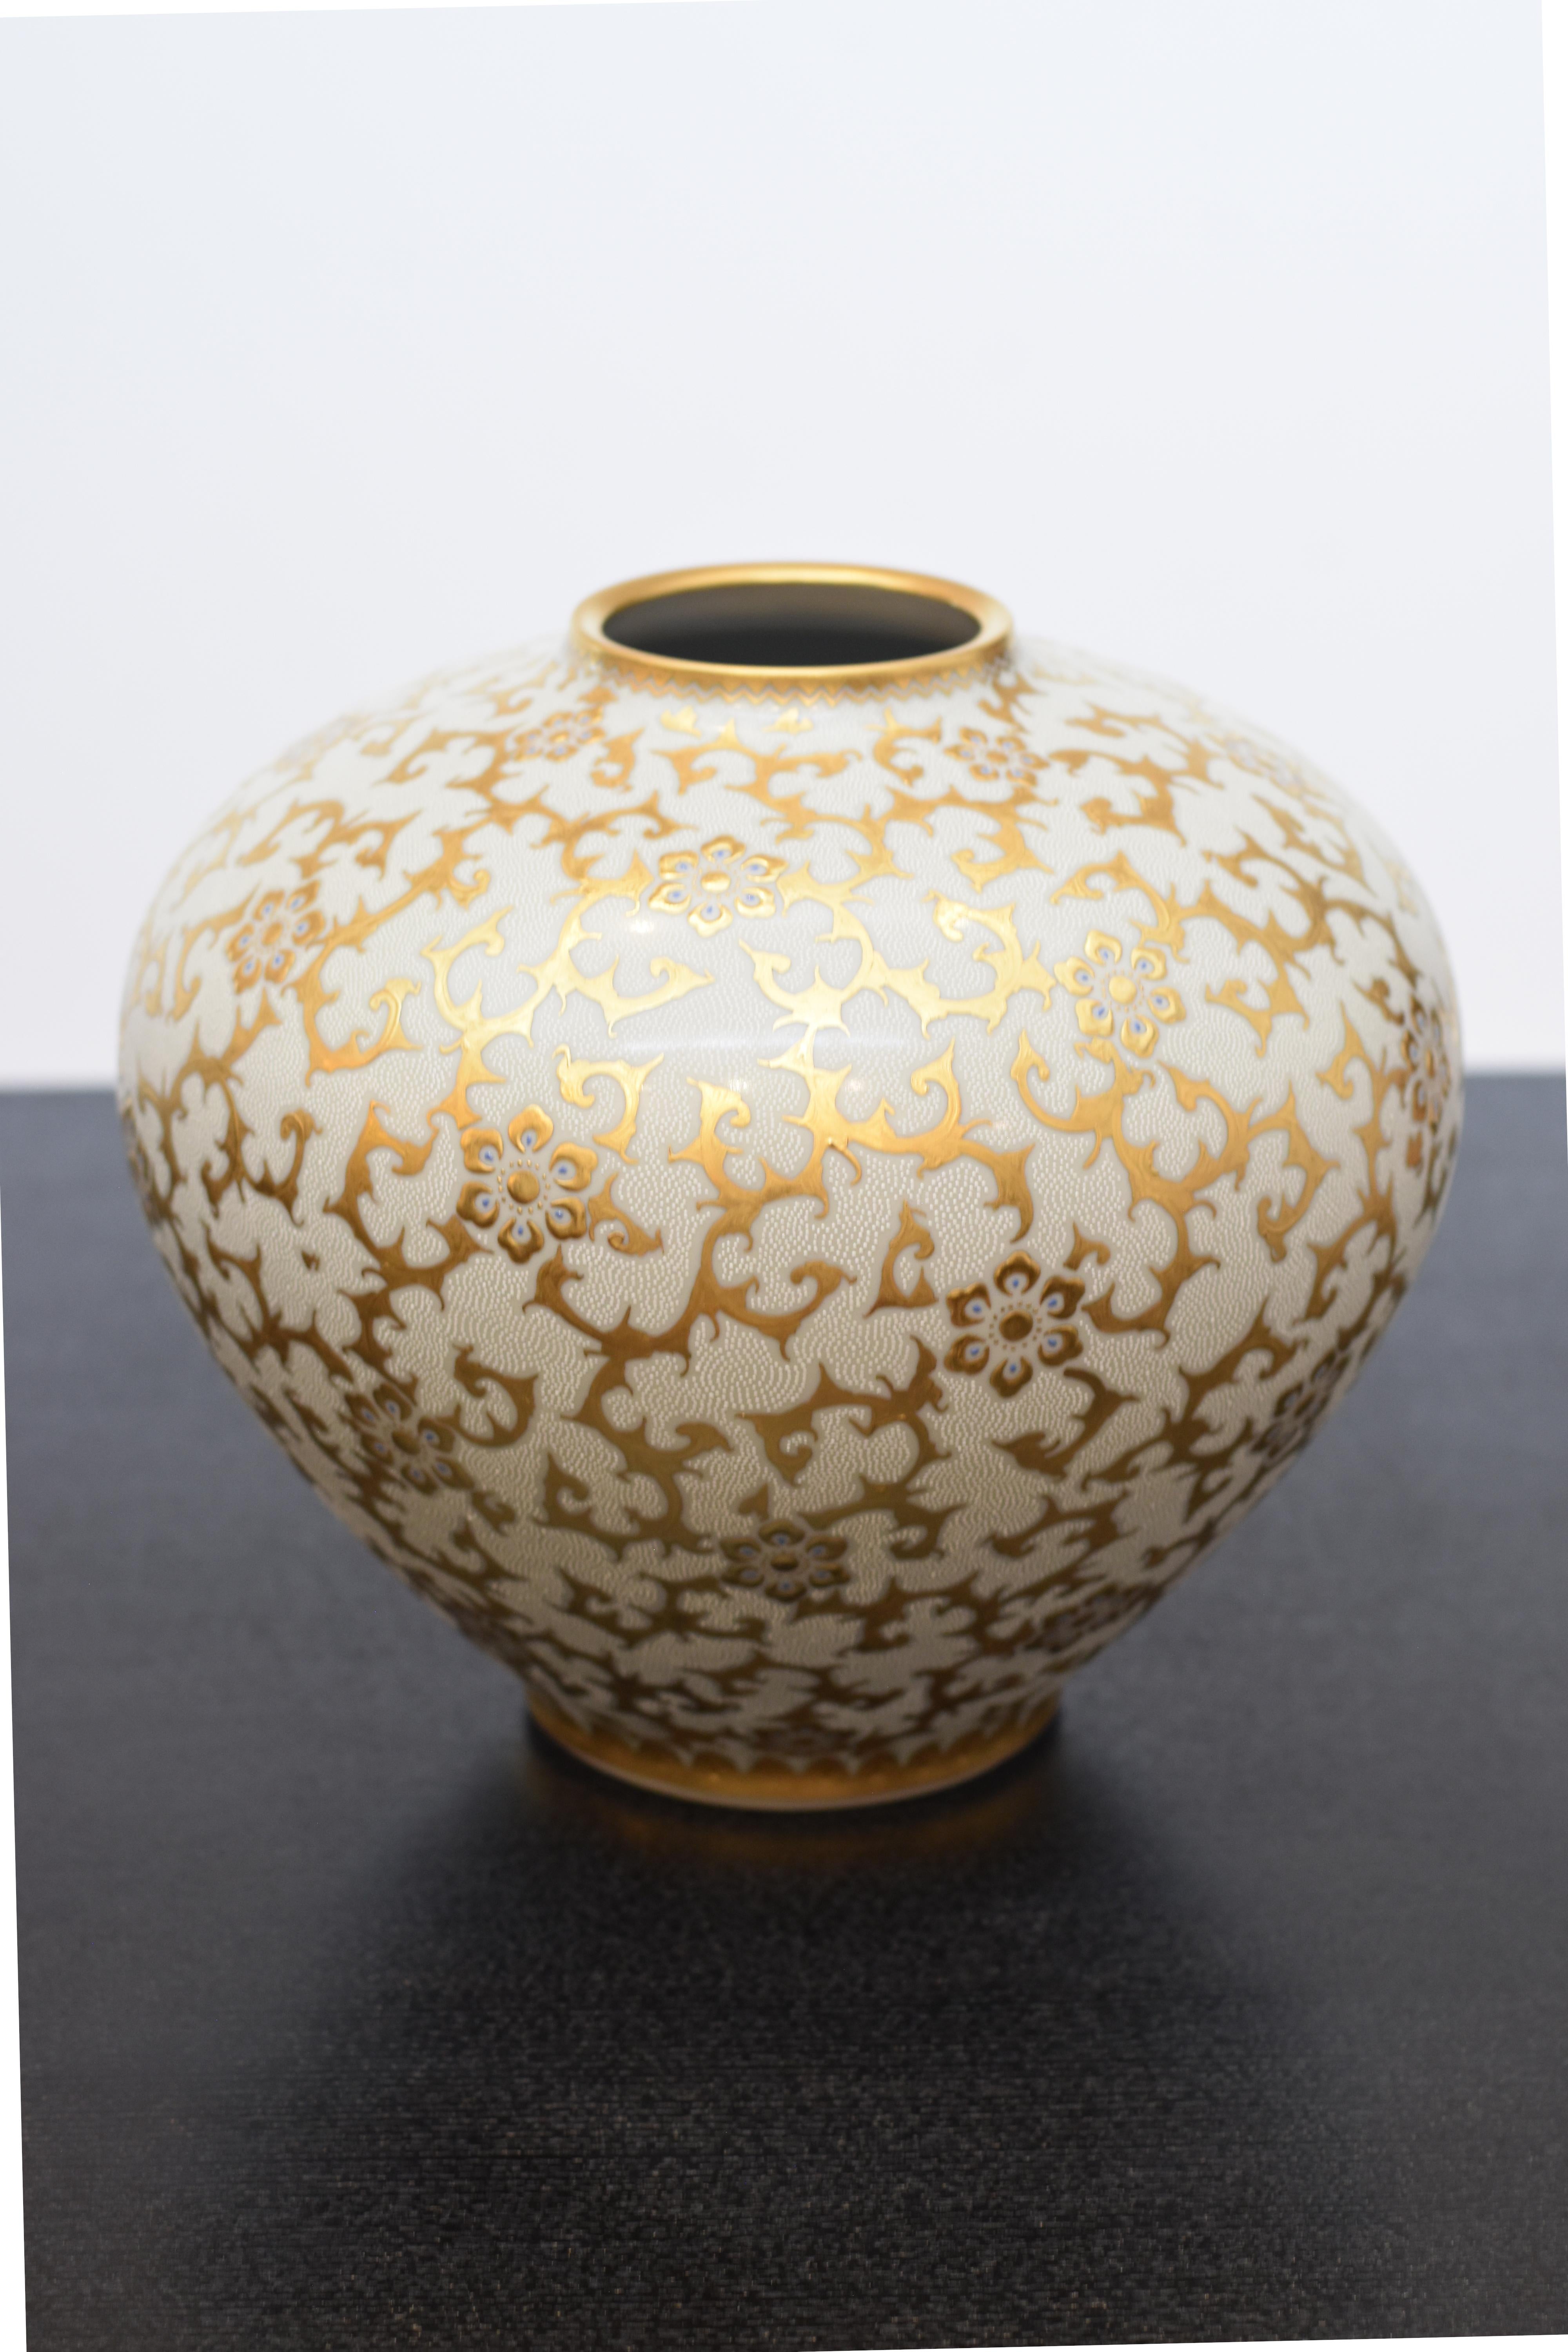 Hand-Painted Contemporary Japanese White Pure Gold Porcelain Vase by Master Artist, 2 For Sale